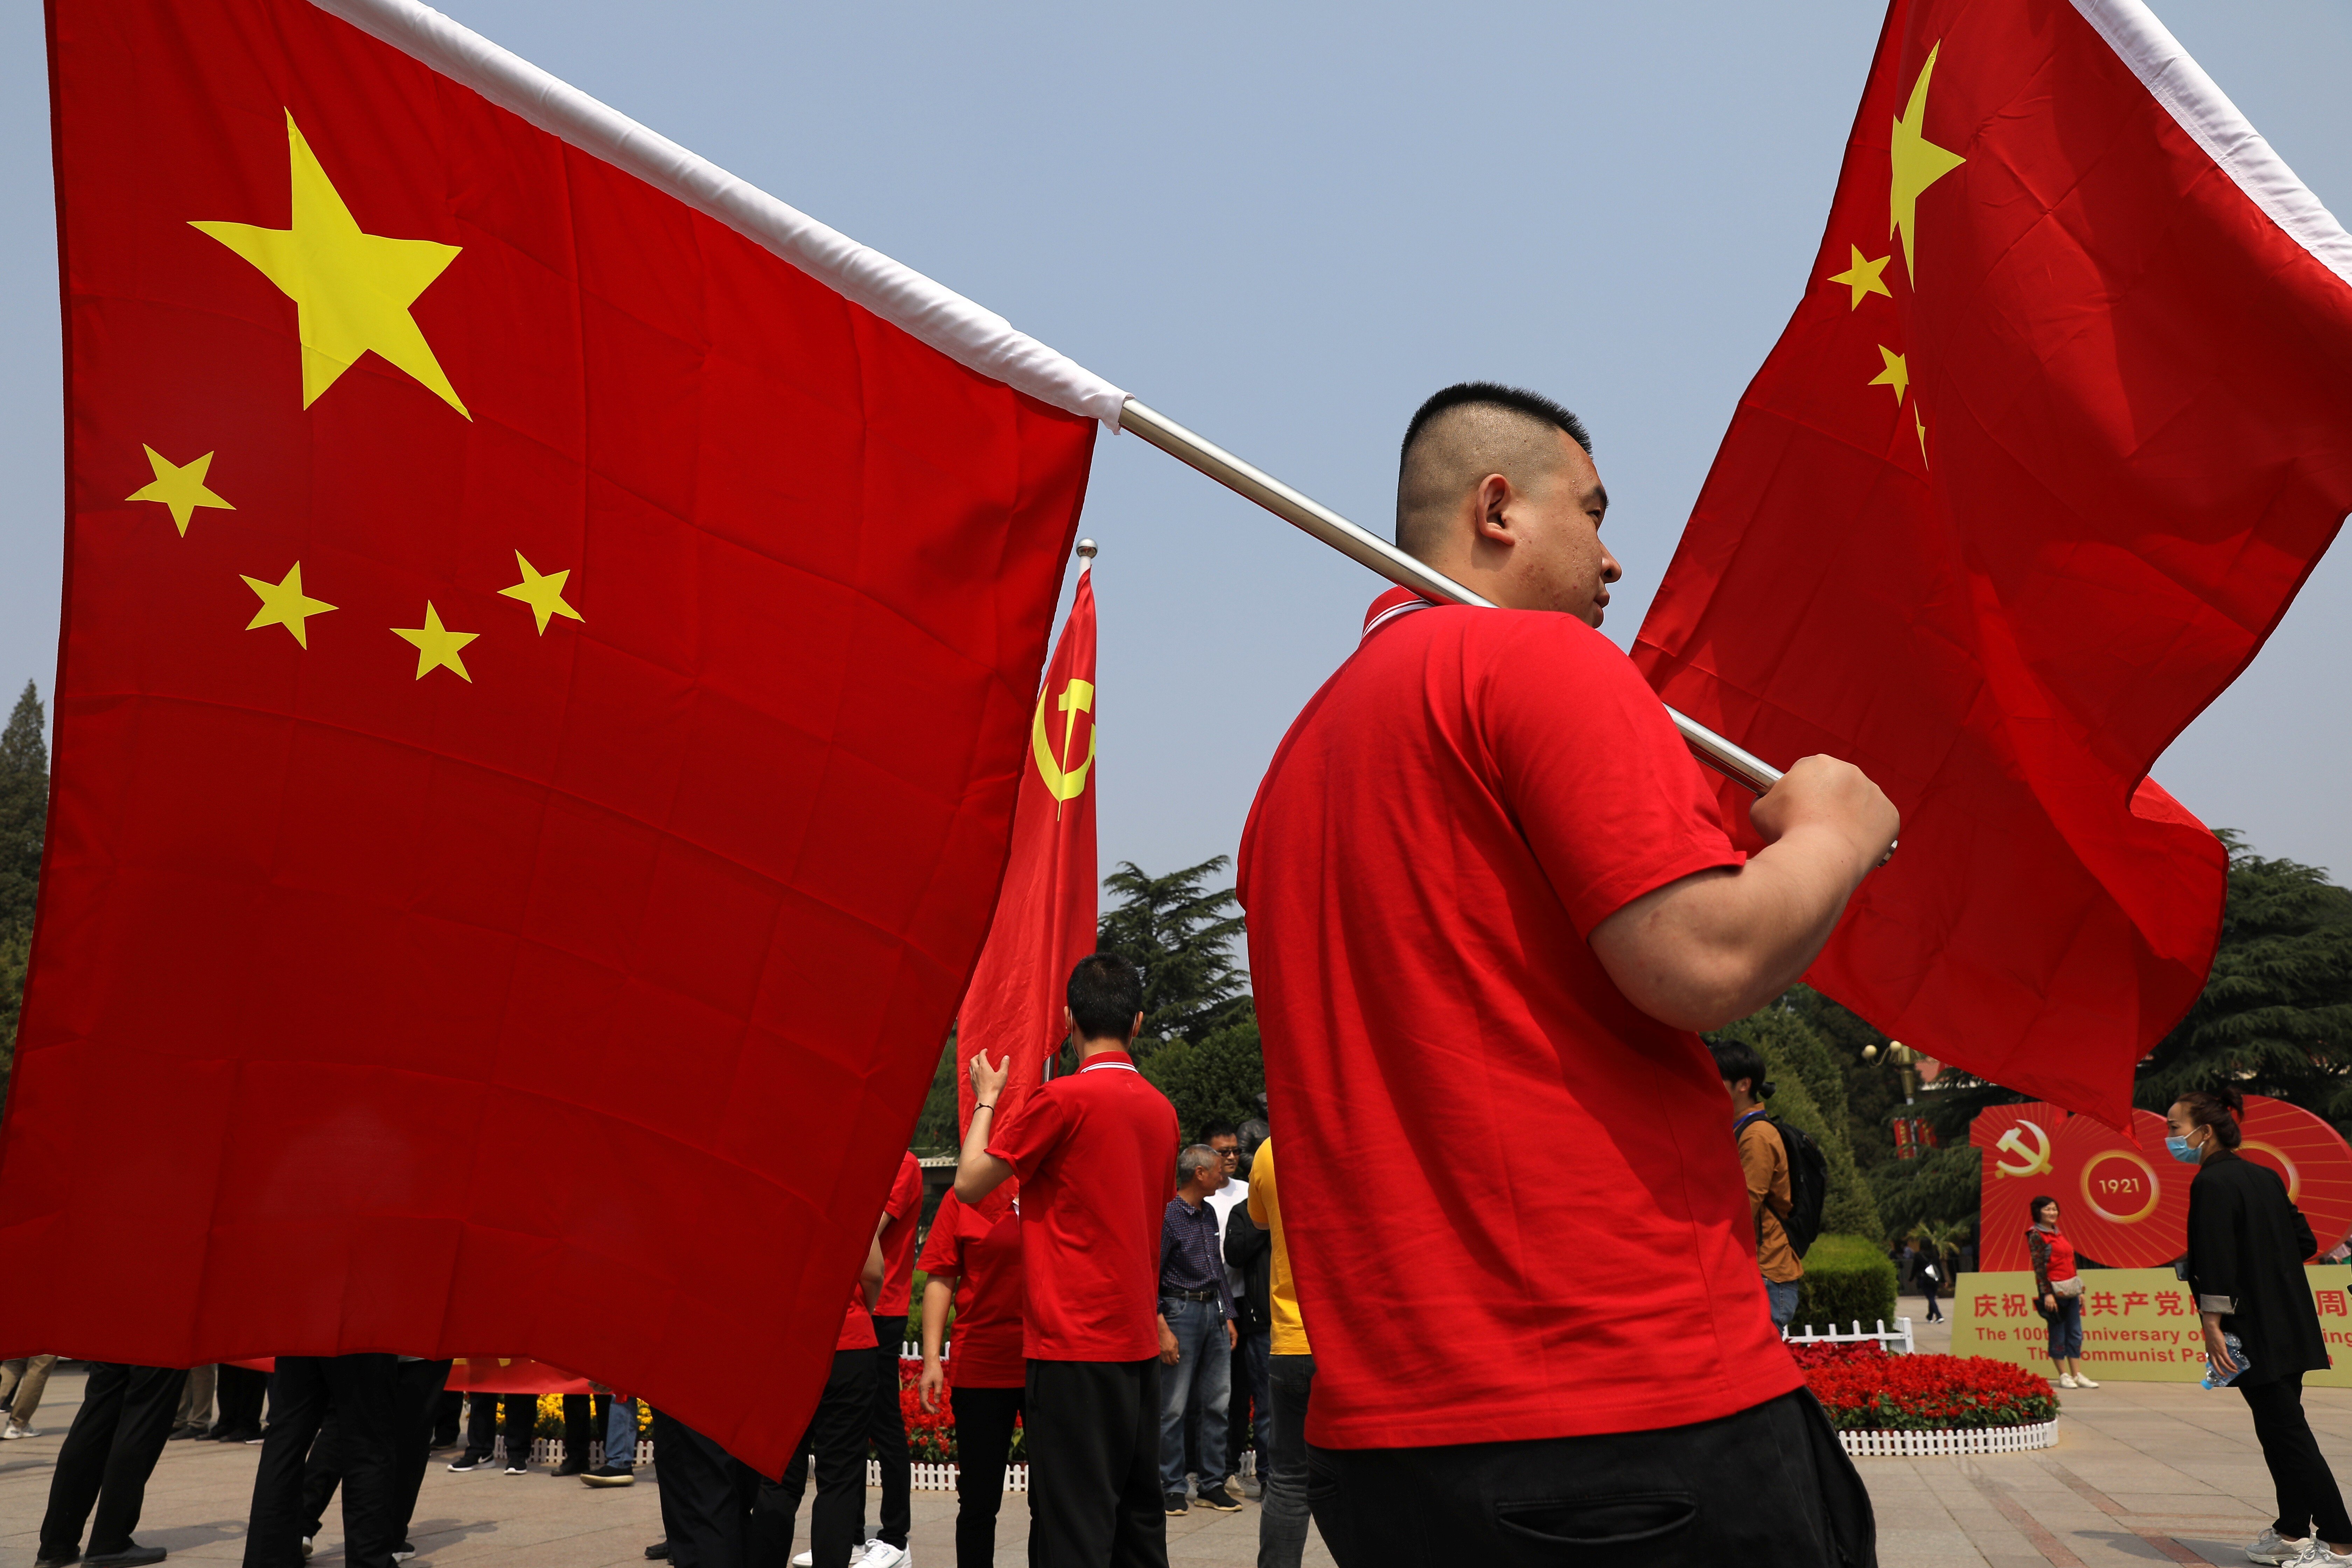 Many Western researchers have attributed China’s economic rise to state-controlled capitalism and view it as a threat to free markets given its top-down central plan. Photo: Reuters